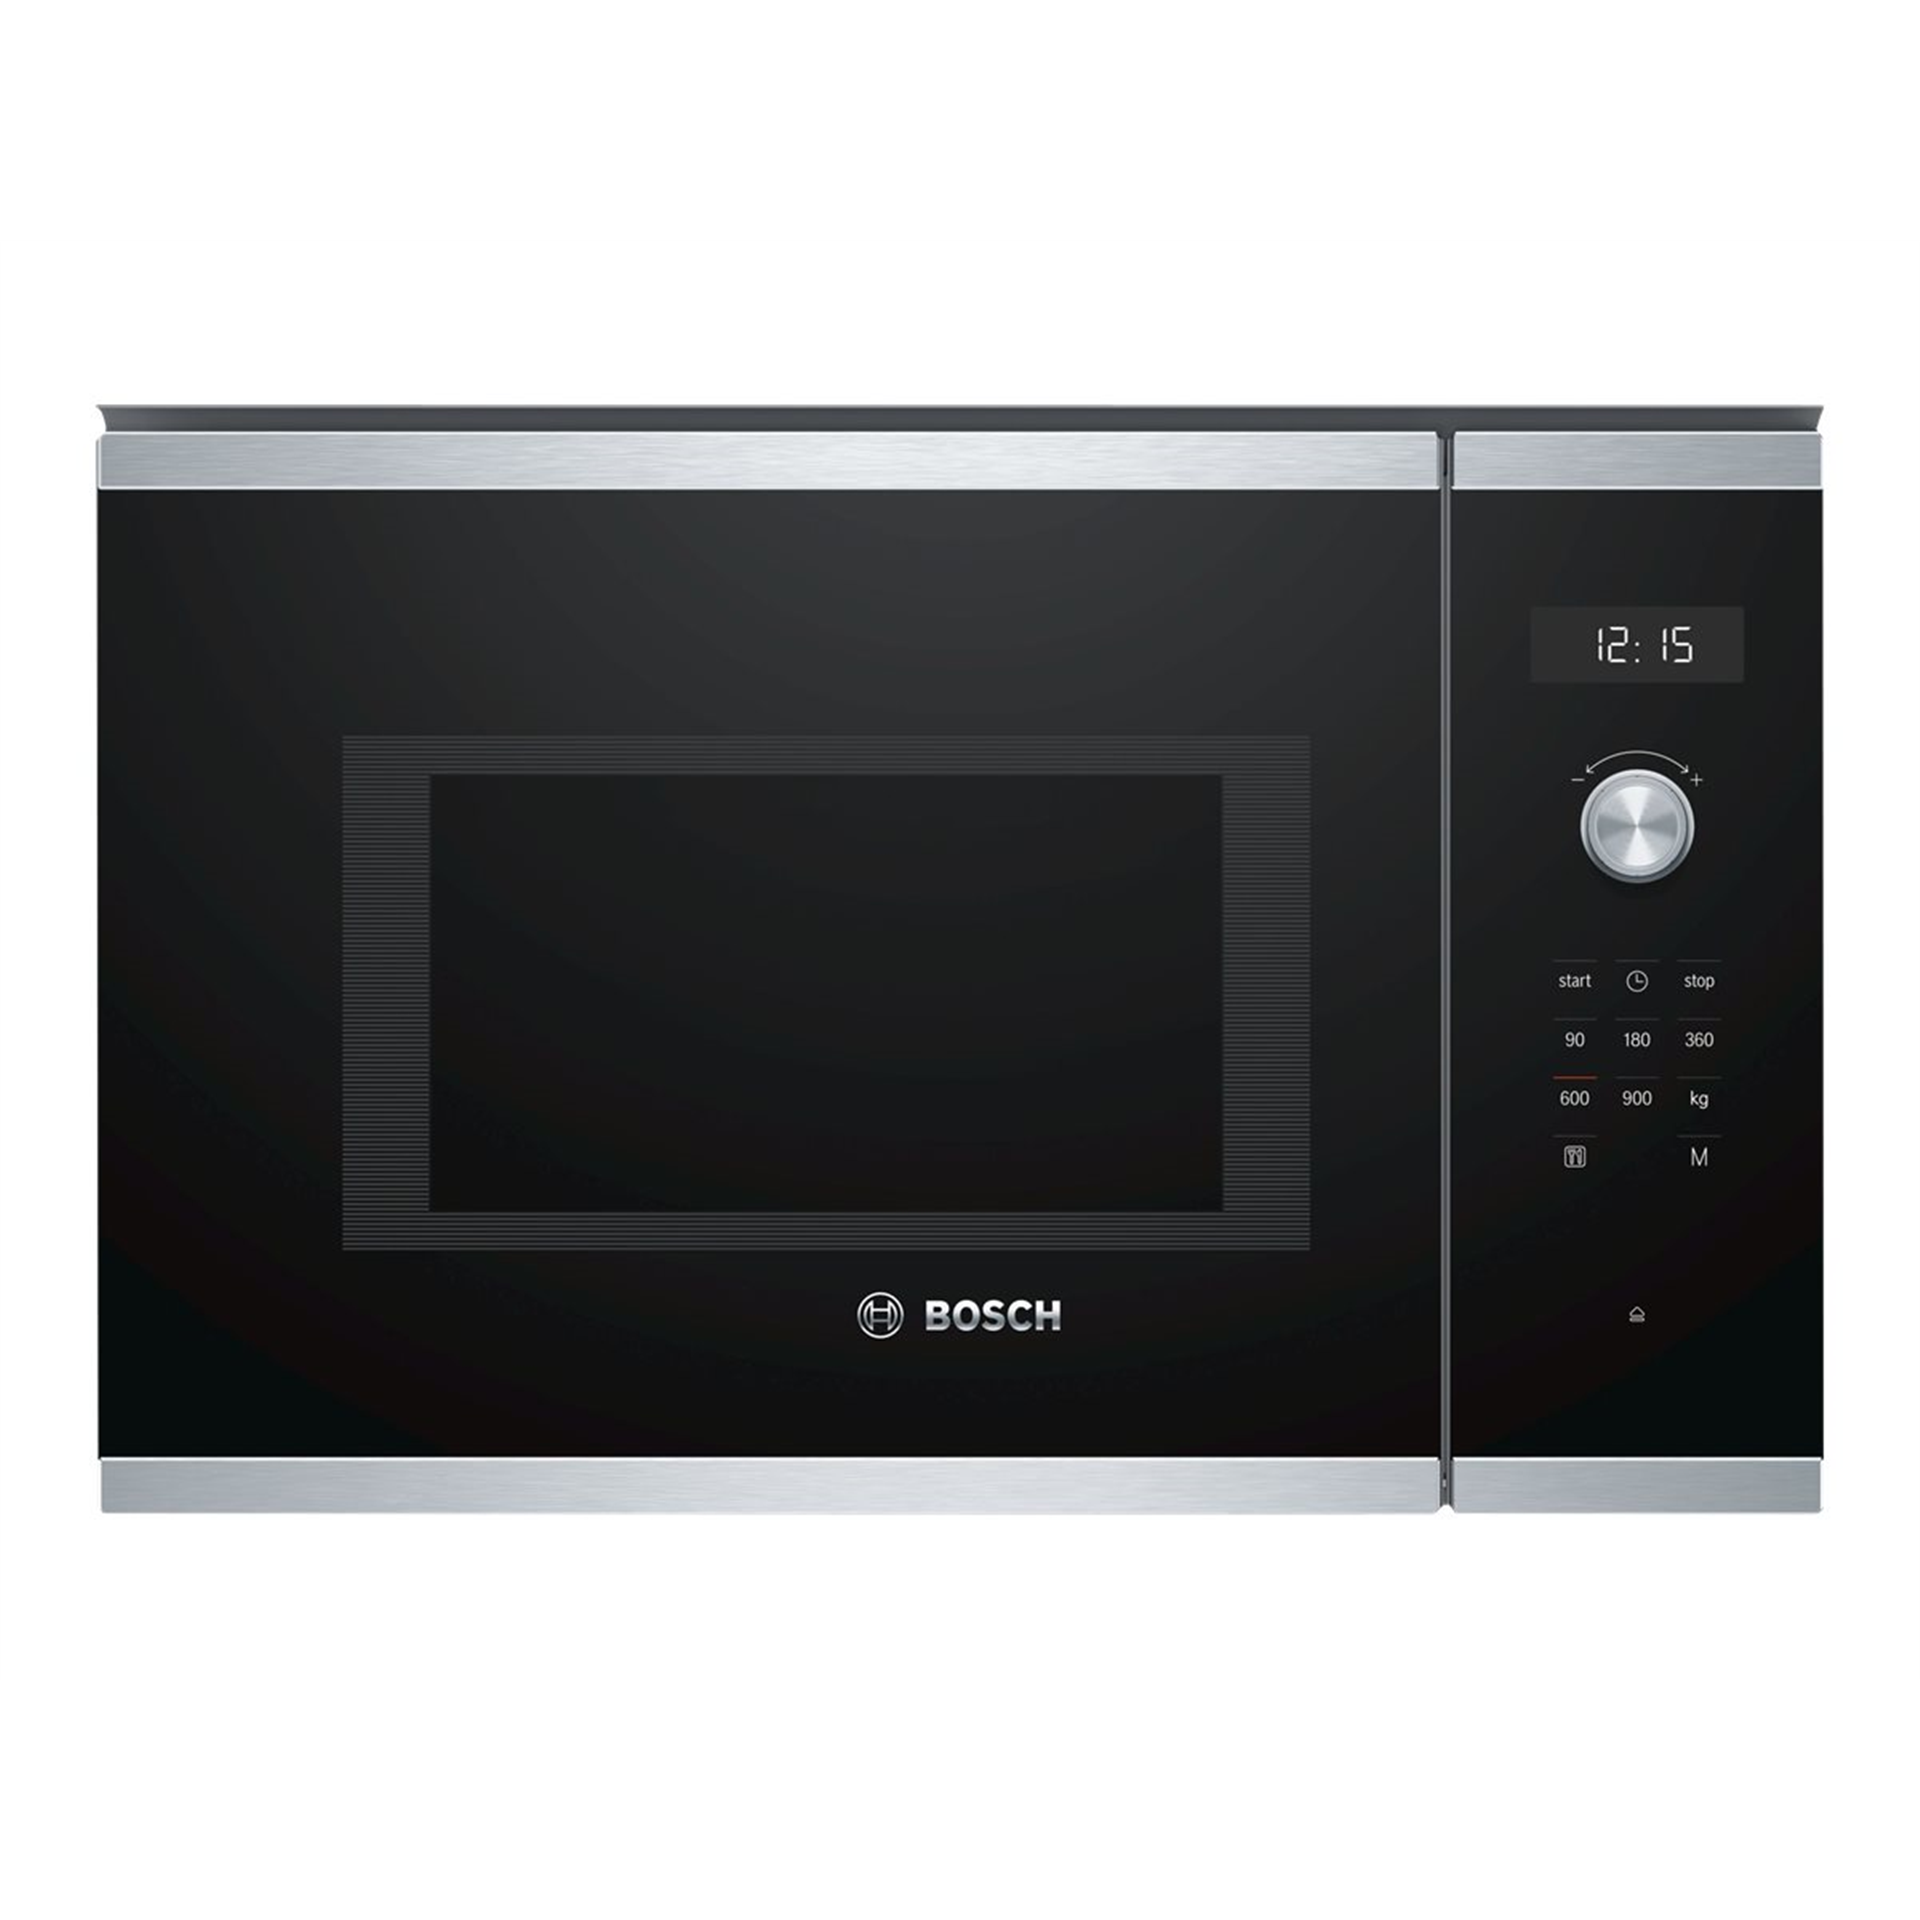 Bosch Microwave Oven BFL554MS0 Built-in 31.5 L 900 W Stainless steel